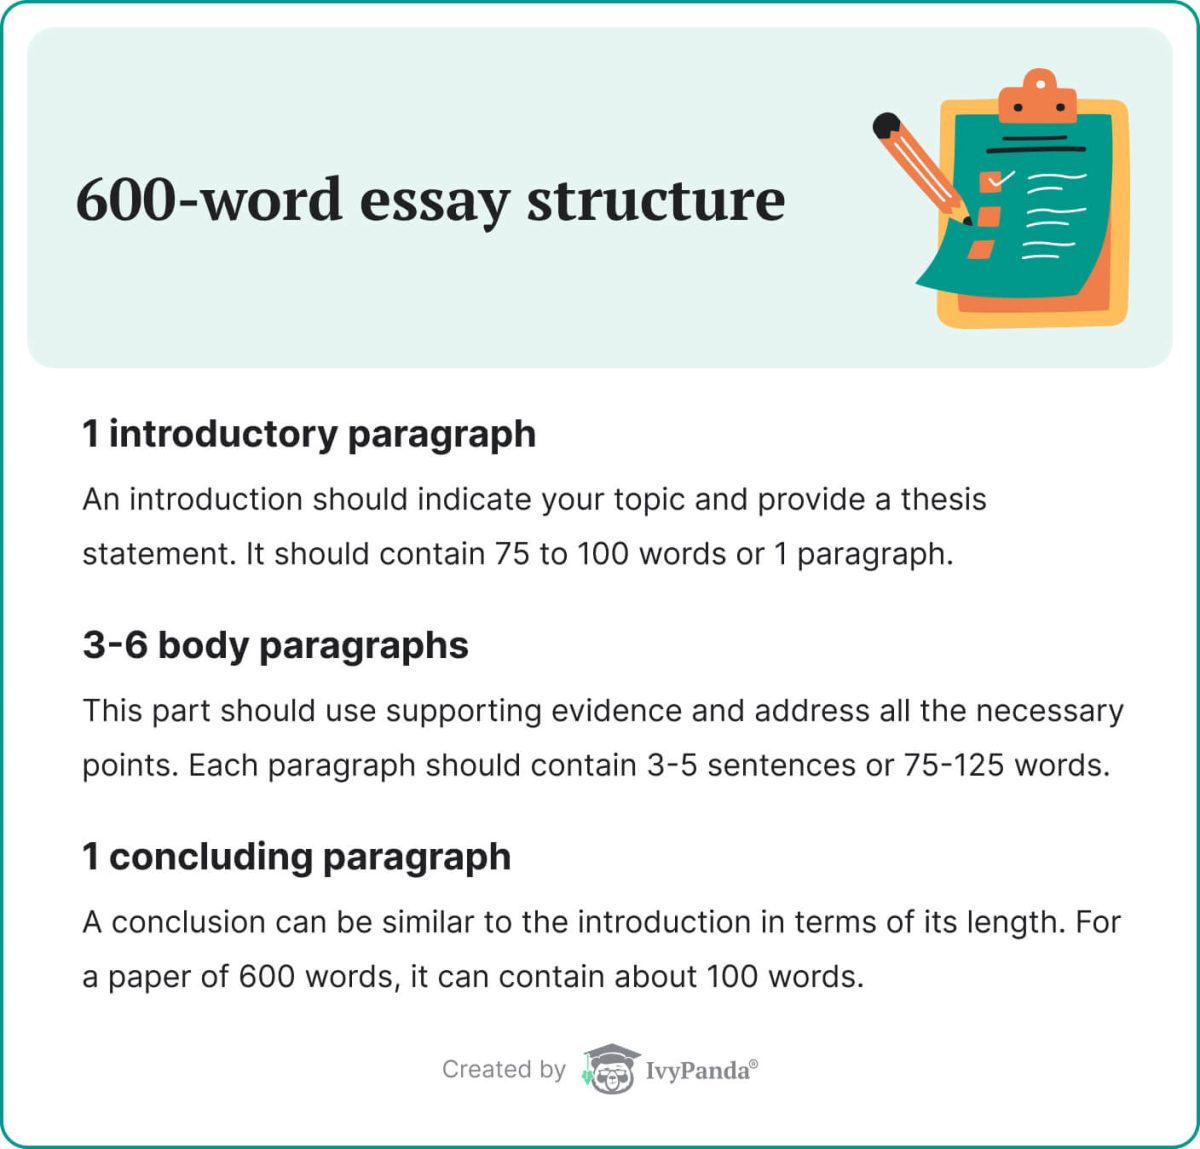 This image shows the 600-word essay structure.